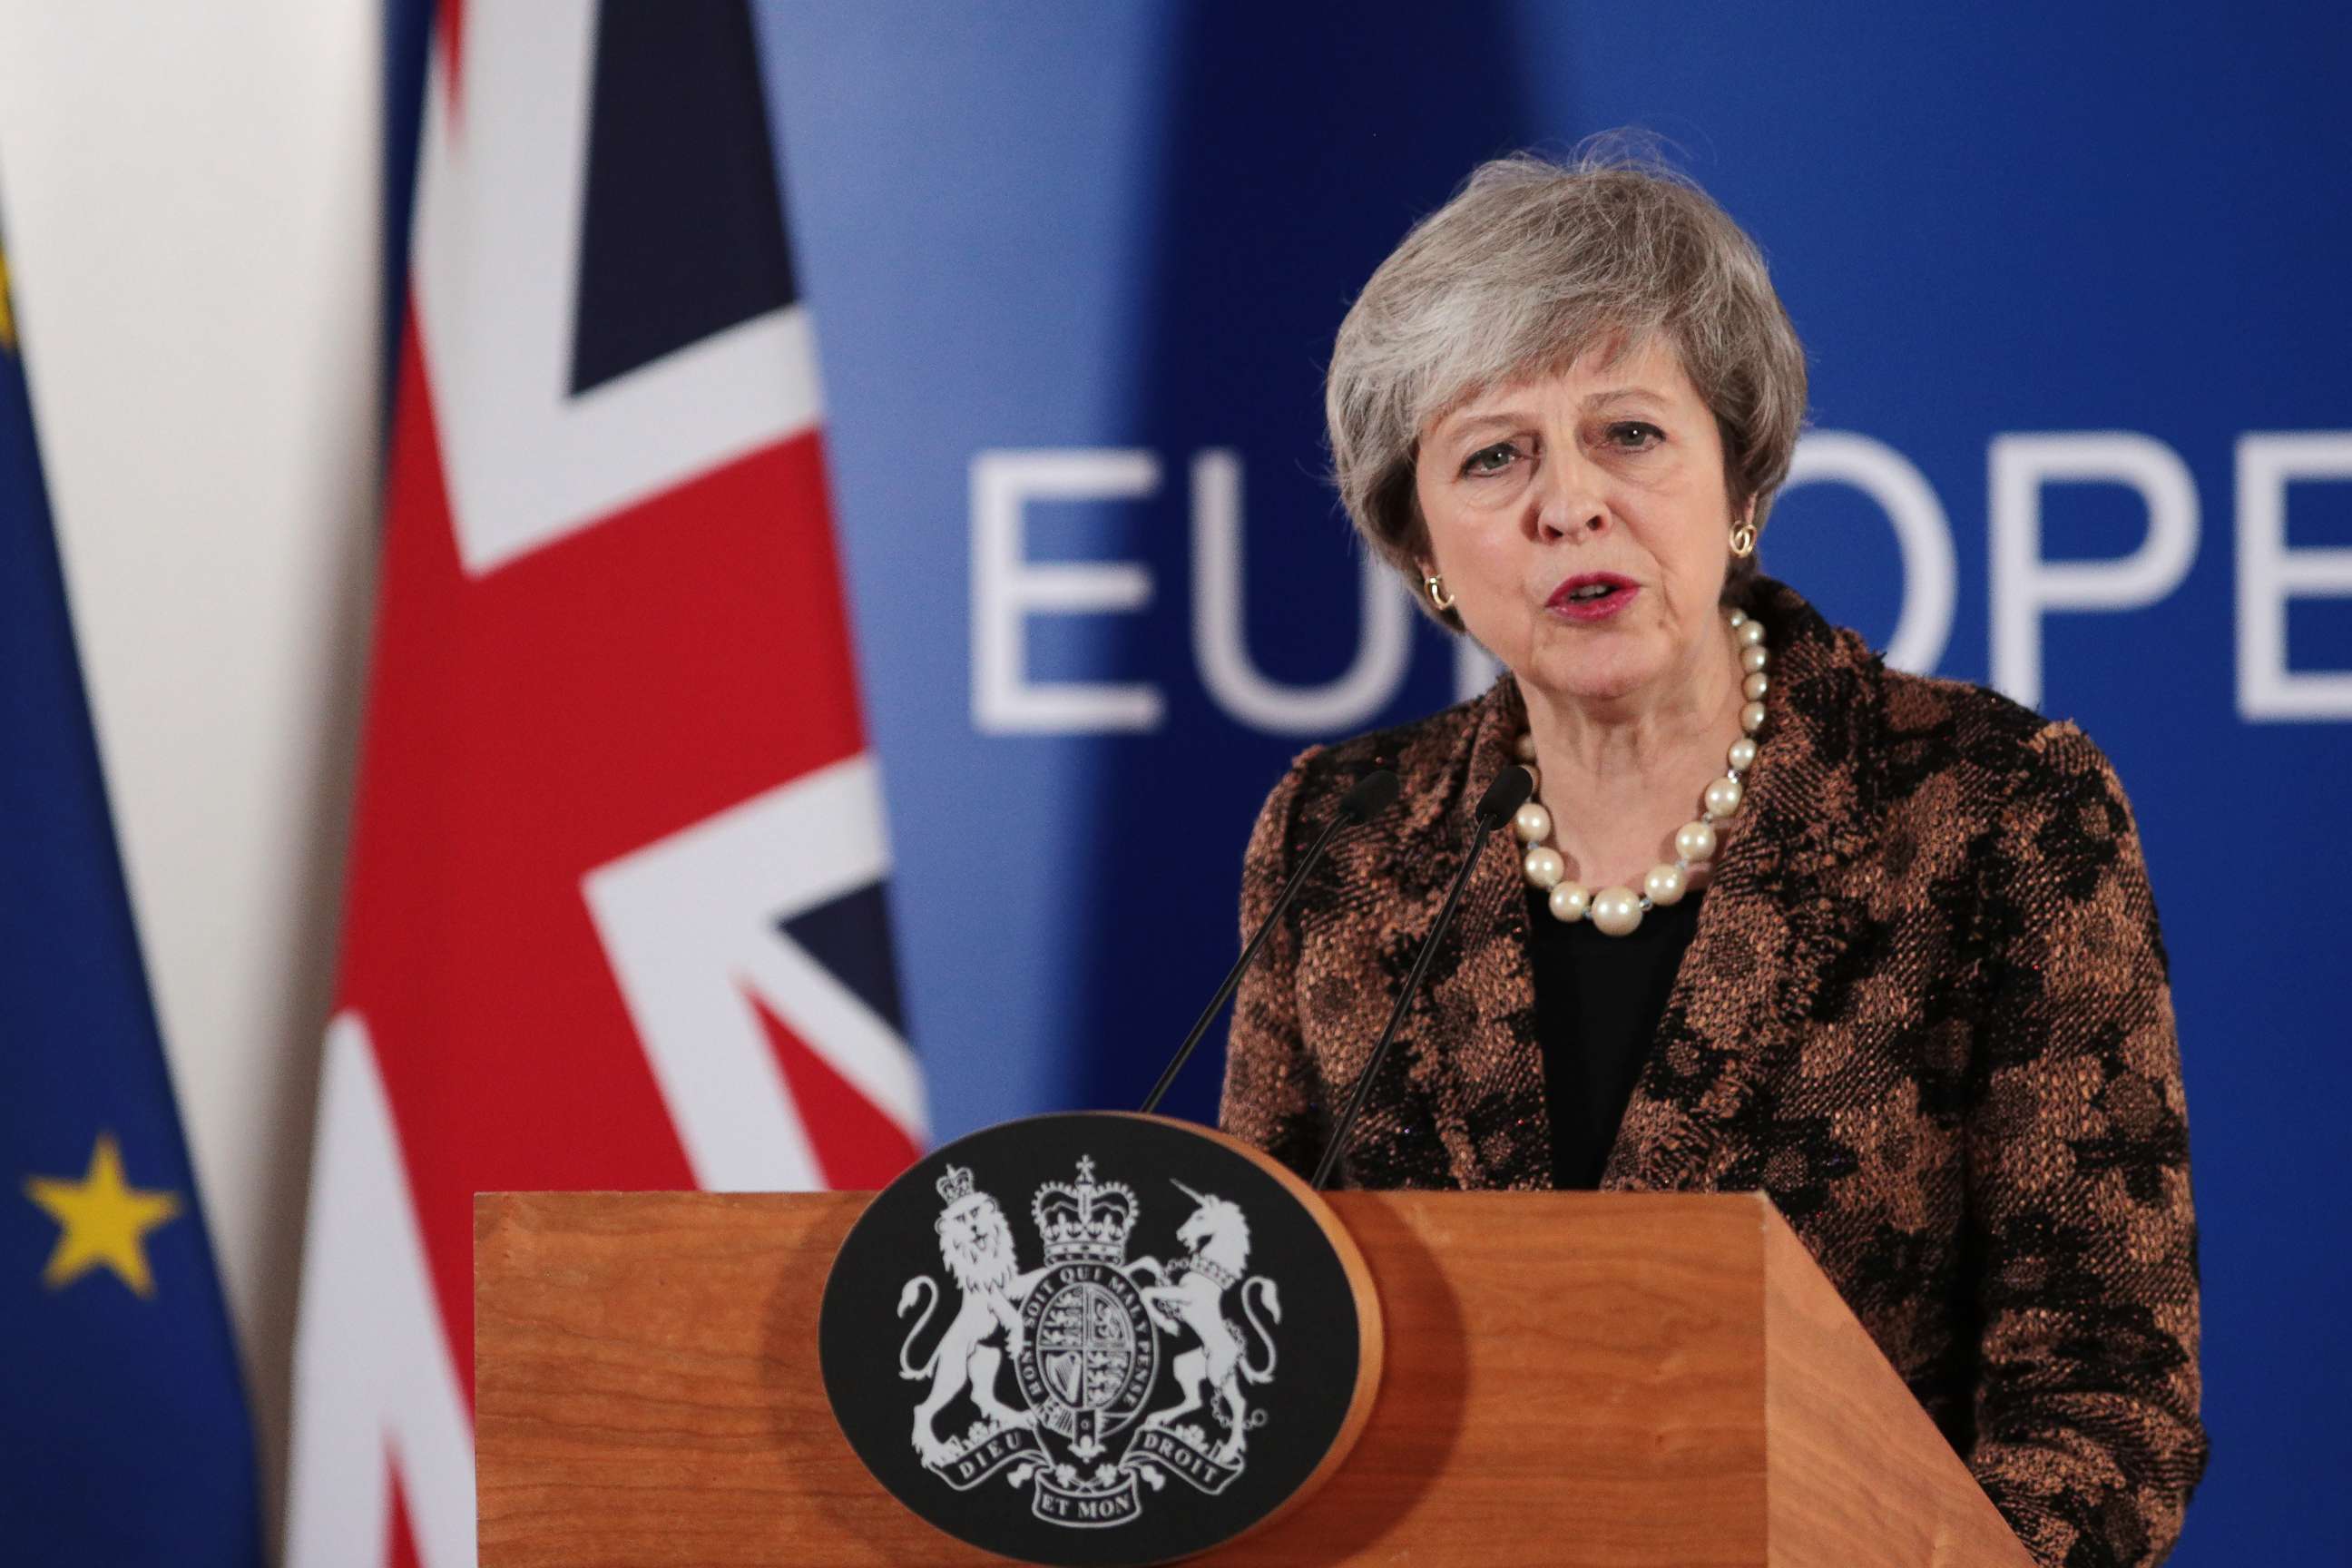 PHOTO: British Prime Minister Theresa May holds a press conference at the European Council during the two day EU summit, Dec. 14, 2018 in Brussels, Belgium. 